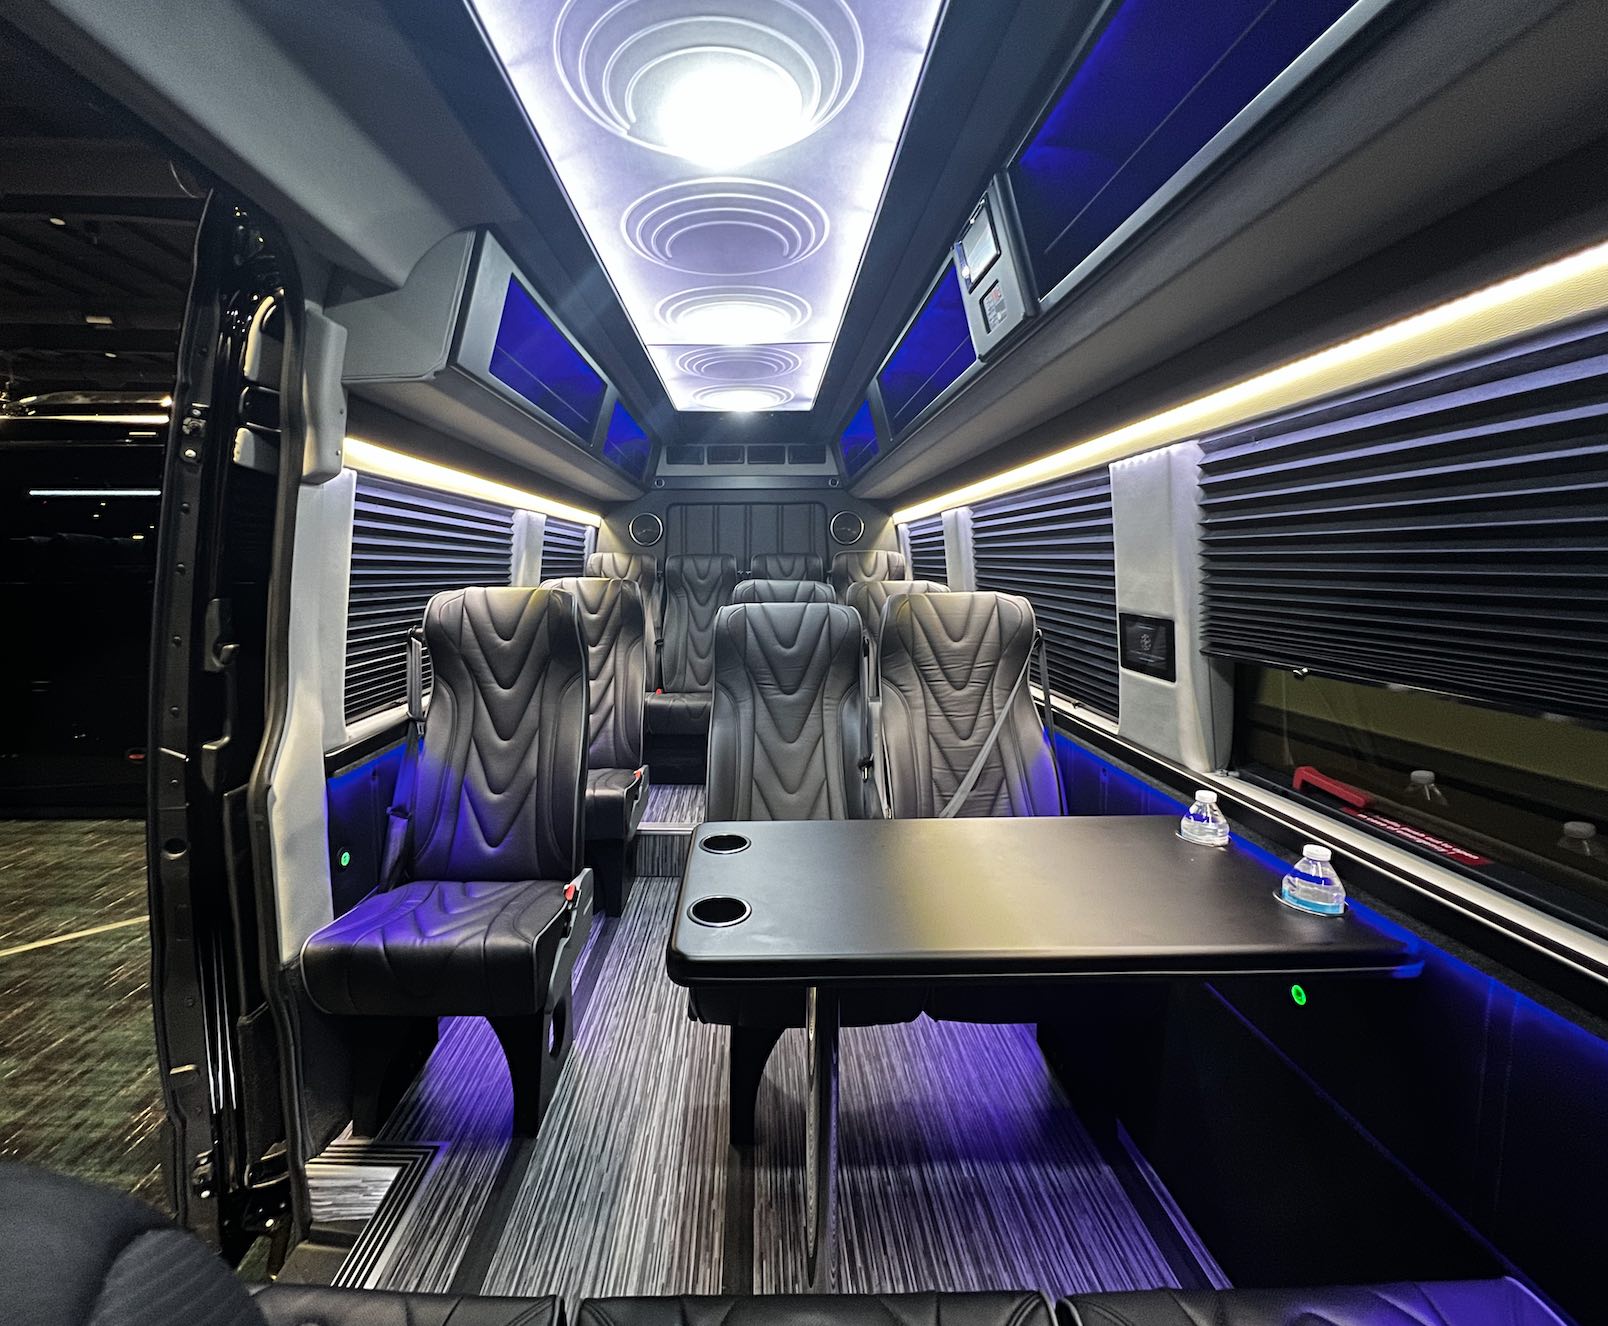 Golden Limo Executive Sprinter Shuttle, interior view with view of conference table seating and rows of individual seating